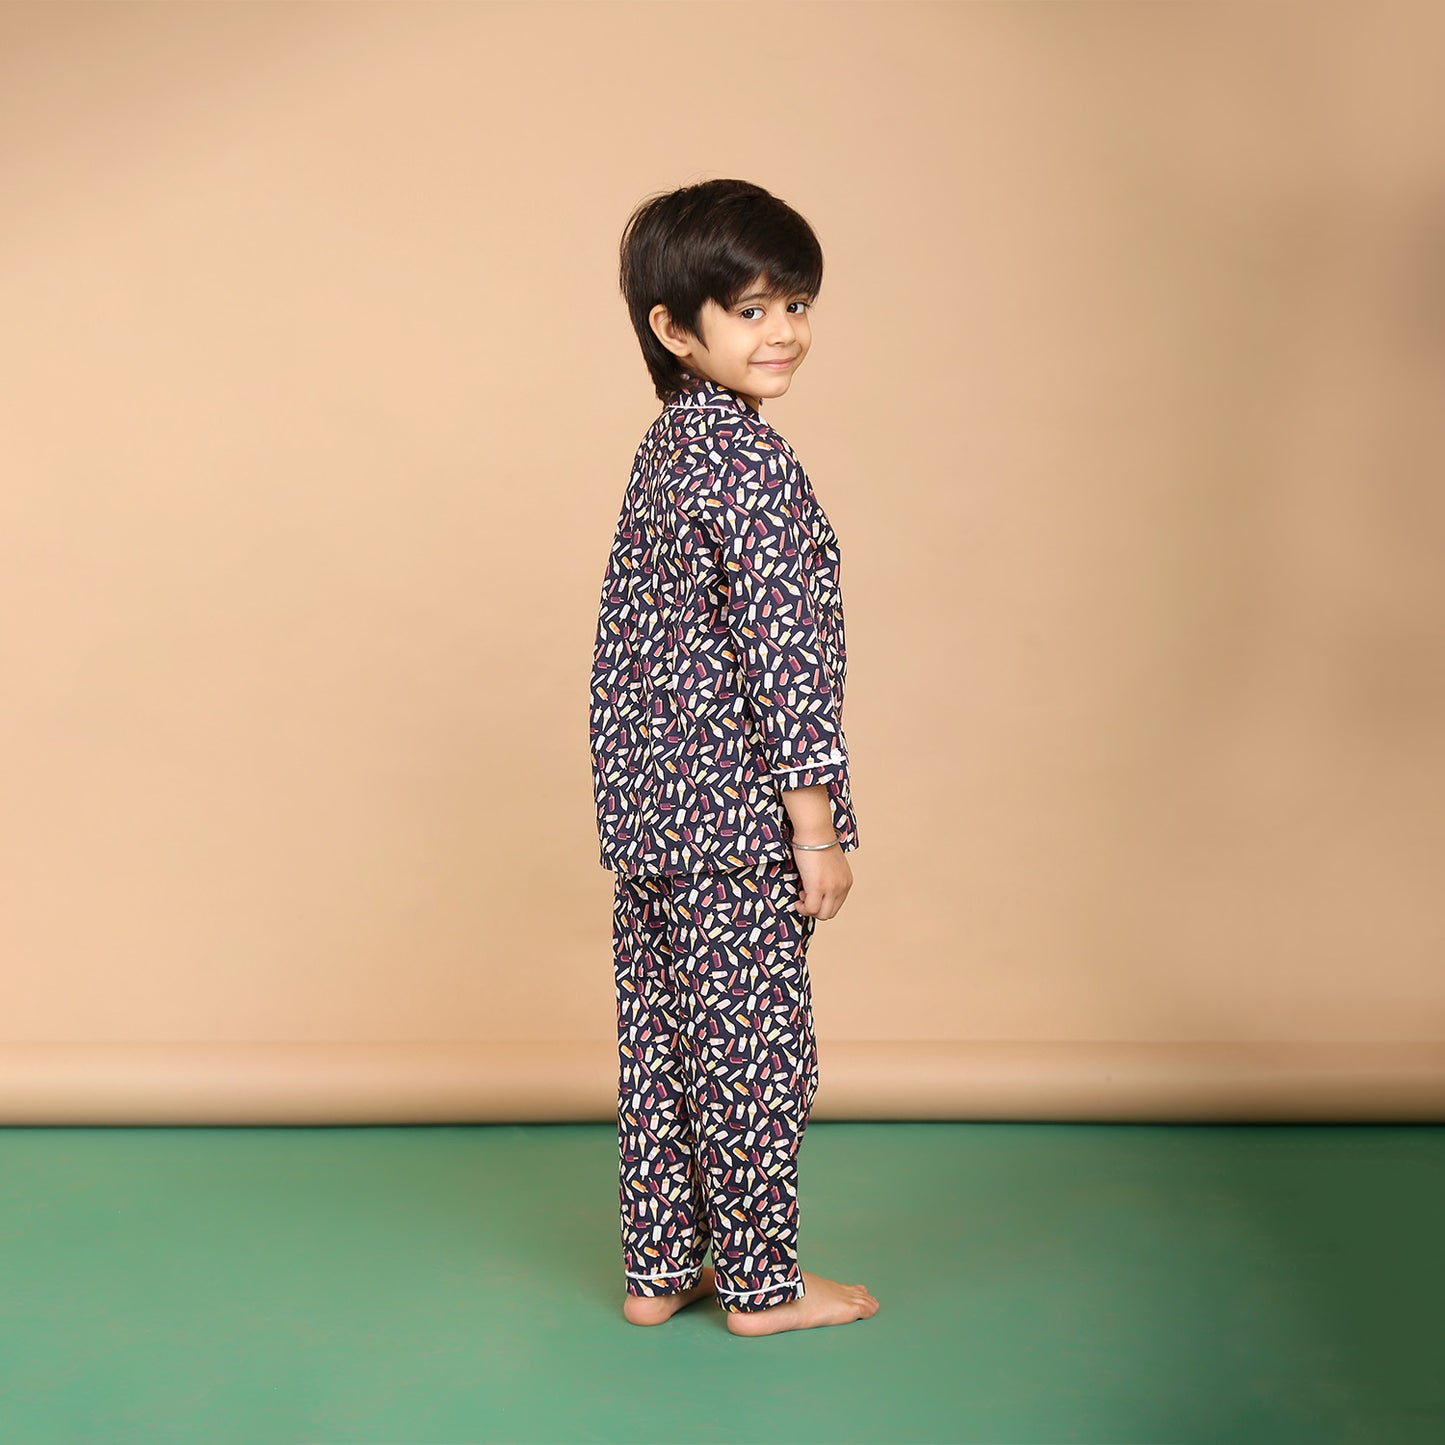 Notched Collared Night Suit in Icecream Print for Girls & Boys